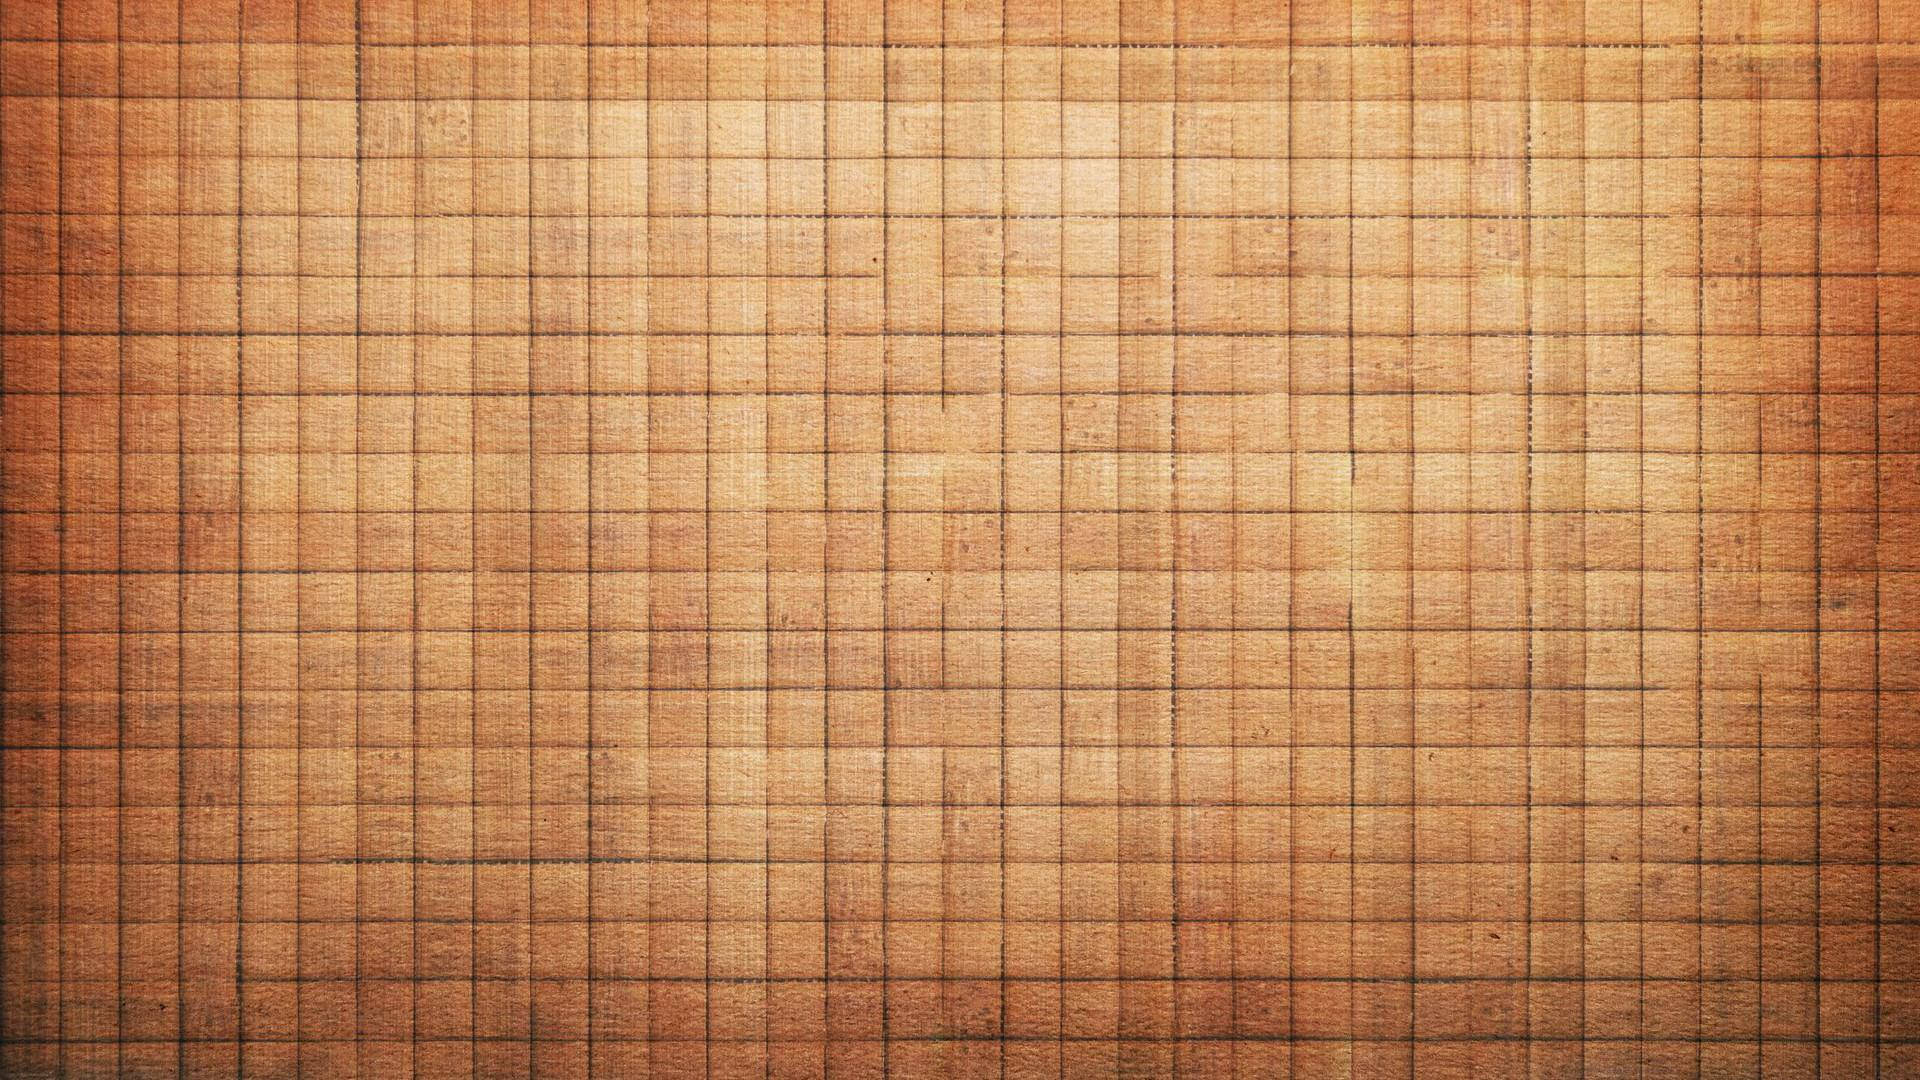 Brown Wooden Puzzle Box Wallpaper